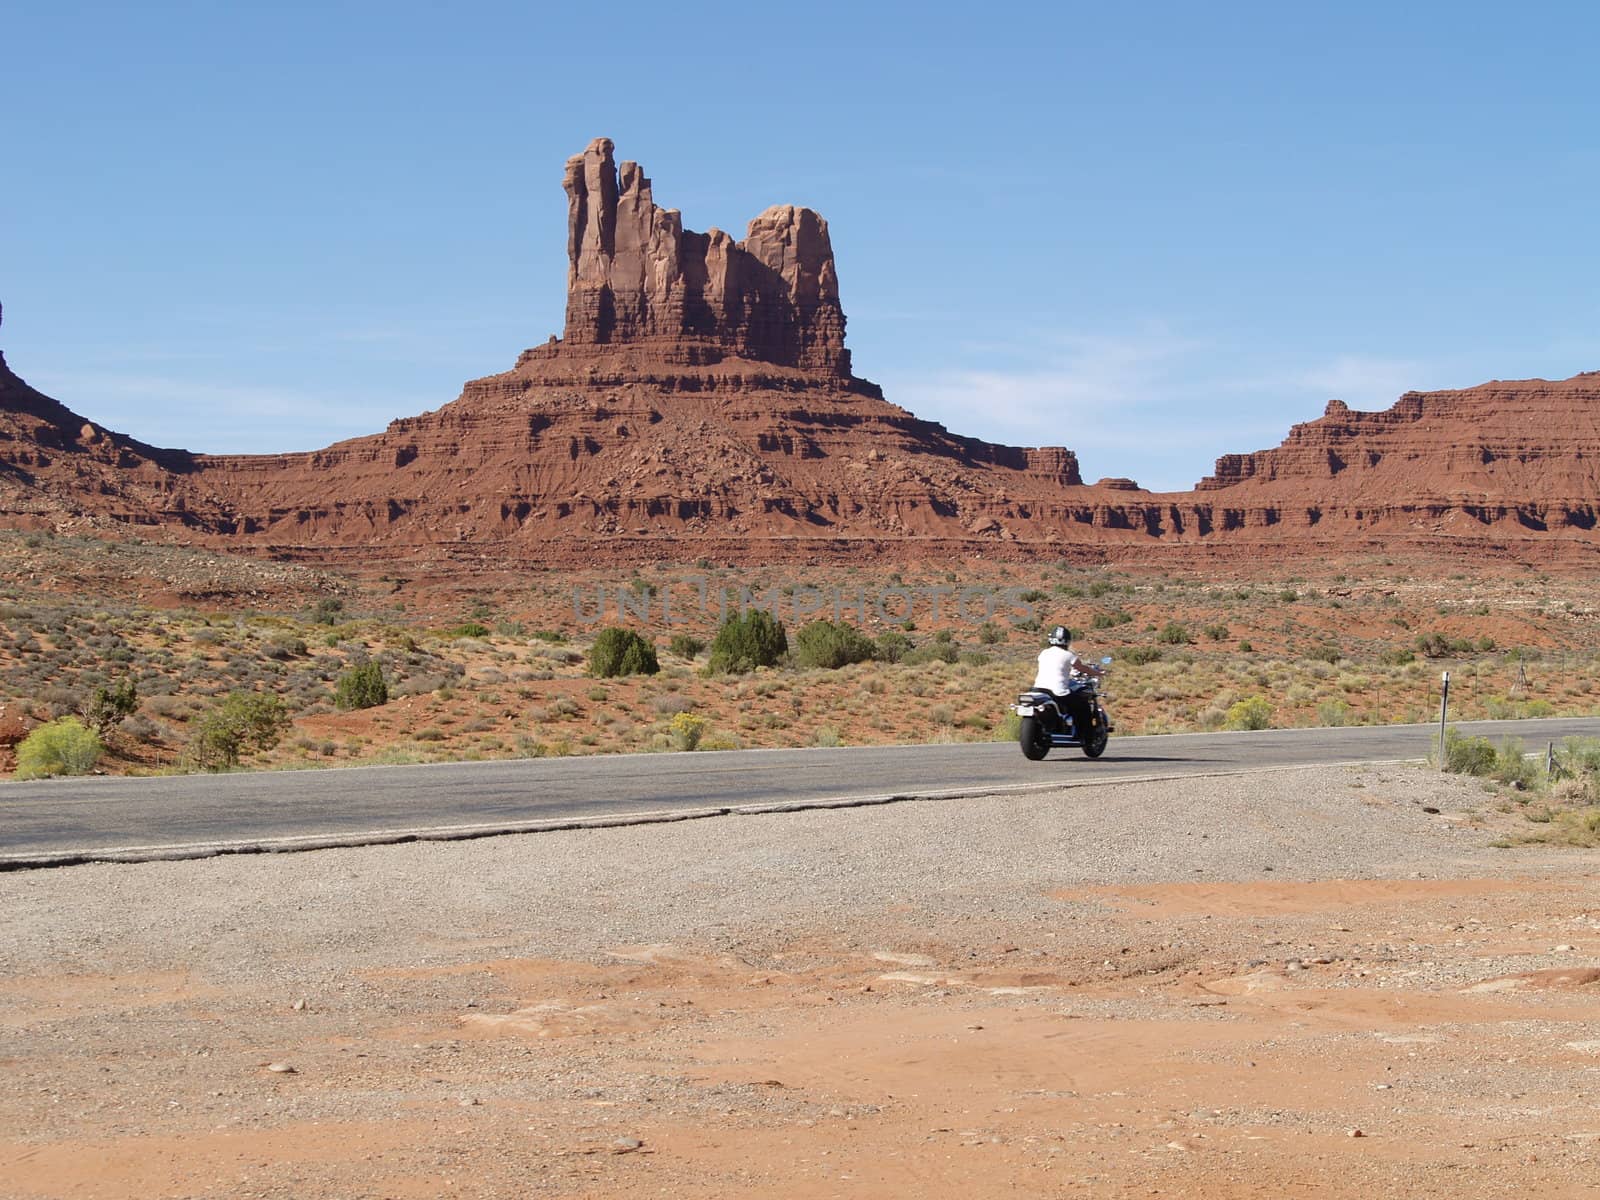 MONUMENT VALLEY, USA - SEPTEMBER 22: Road of Monument Valey on  Sepetmeber 22, 2011. The largest sandstone buttes reaching 1,000 ft (300 m) above the valley floor.